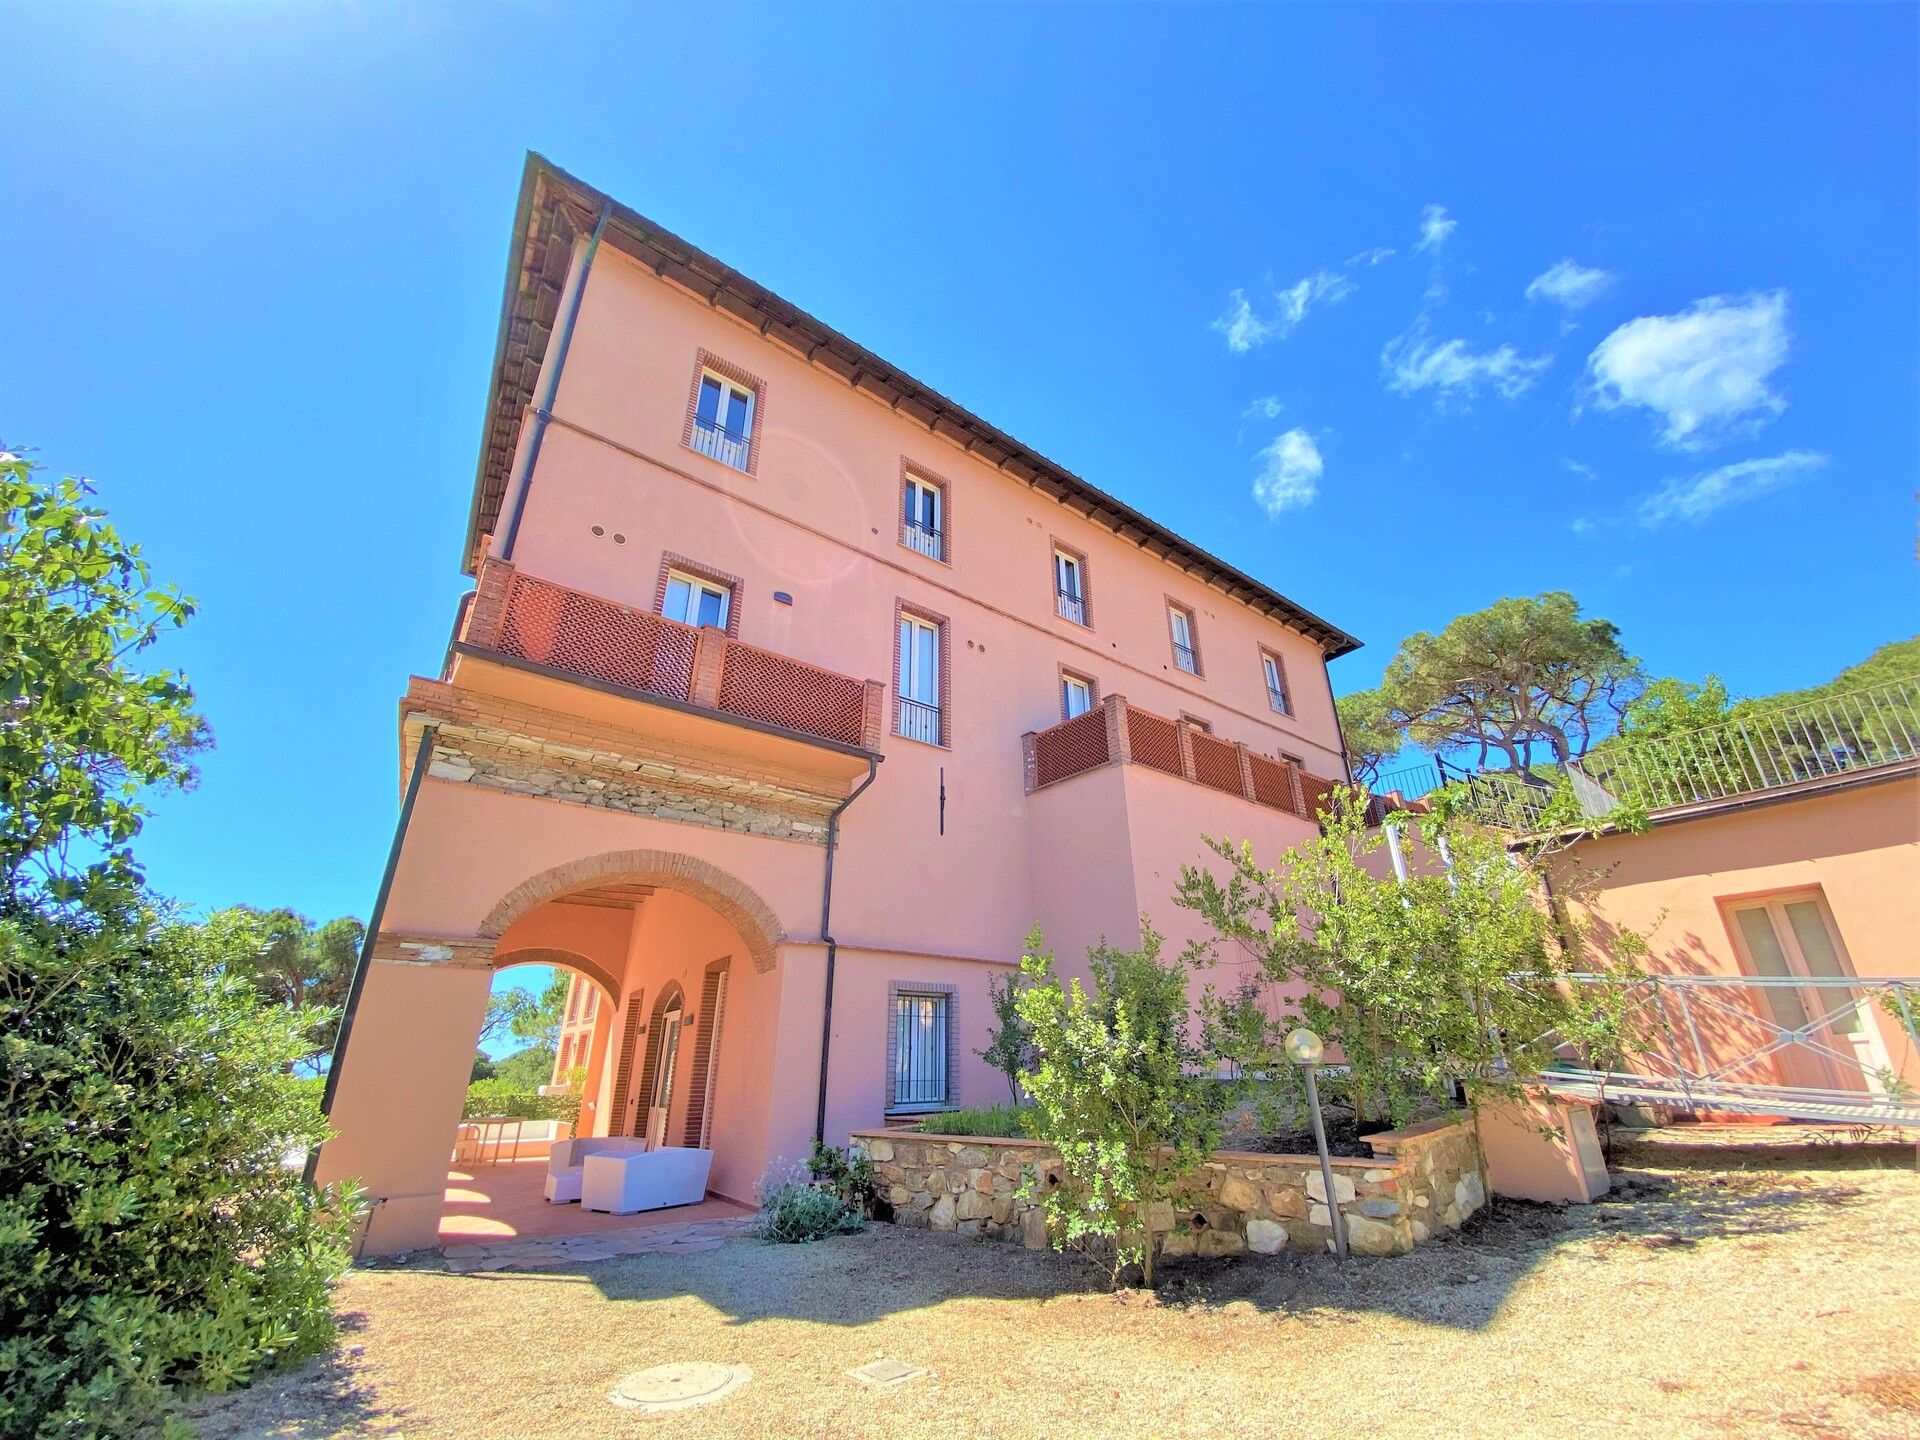 For sale apartment by the sea Rio Marina Toscana